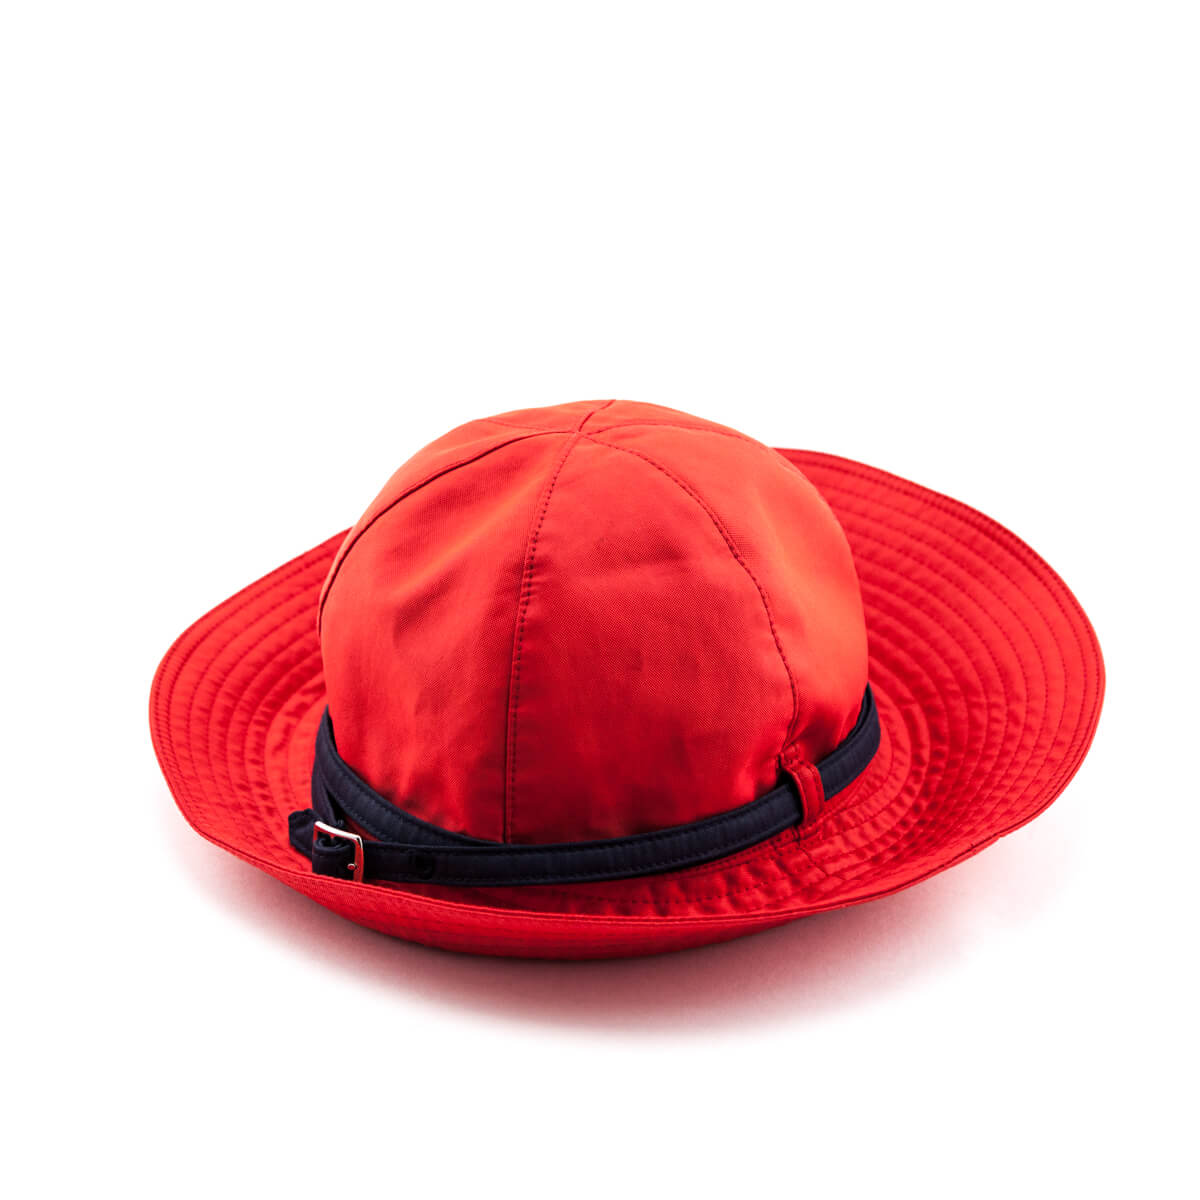 Hermes Red Woven Bucket Hat Size M - Love that Bag etc - Preowned Authentic Designer Handbags & Preloved Fashions